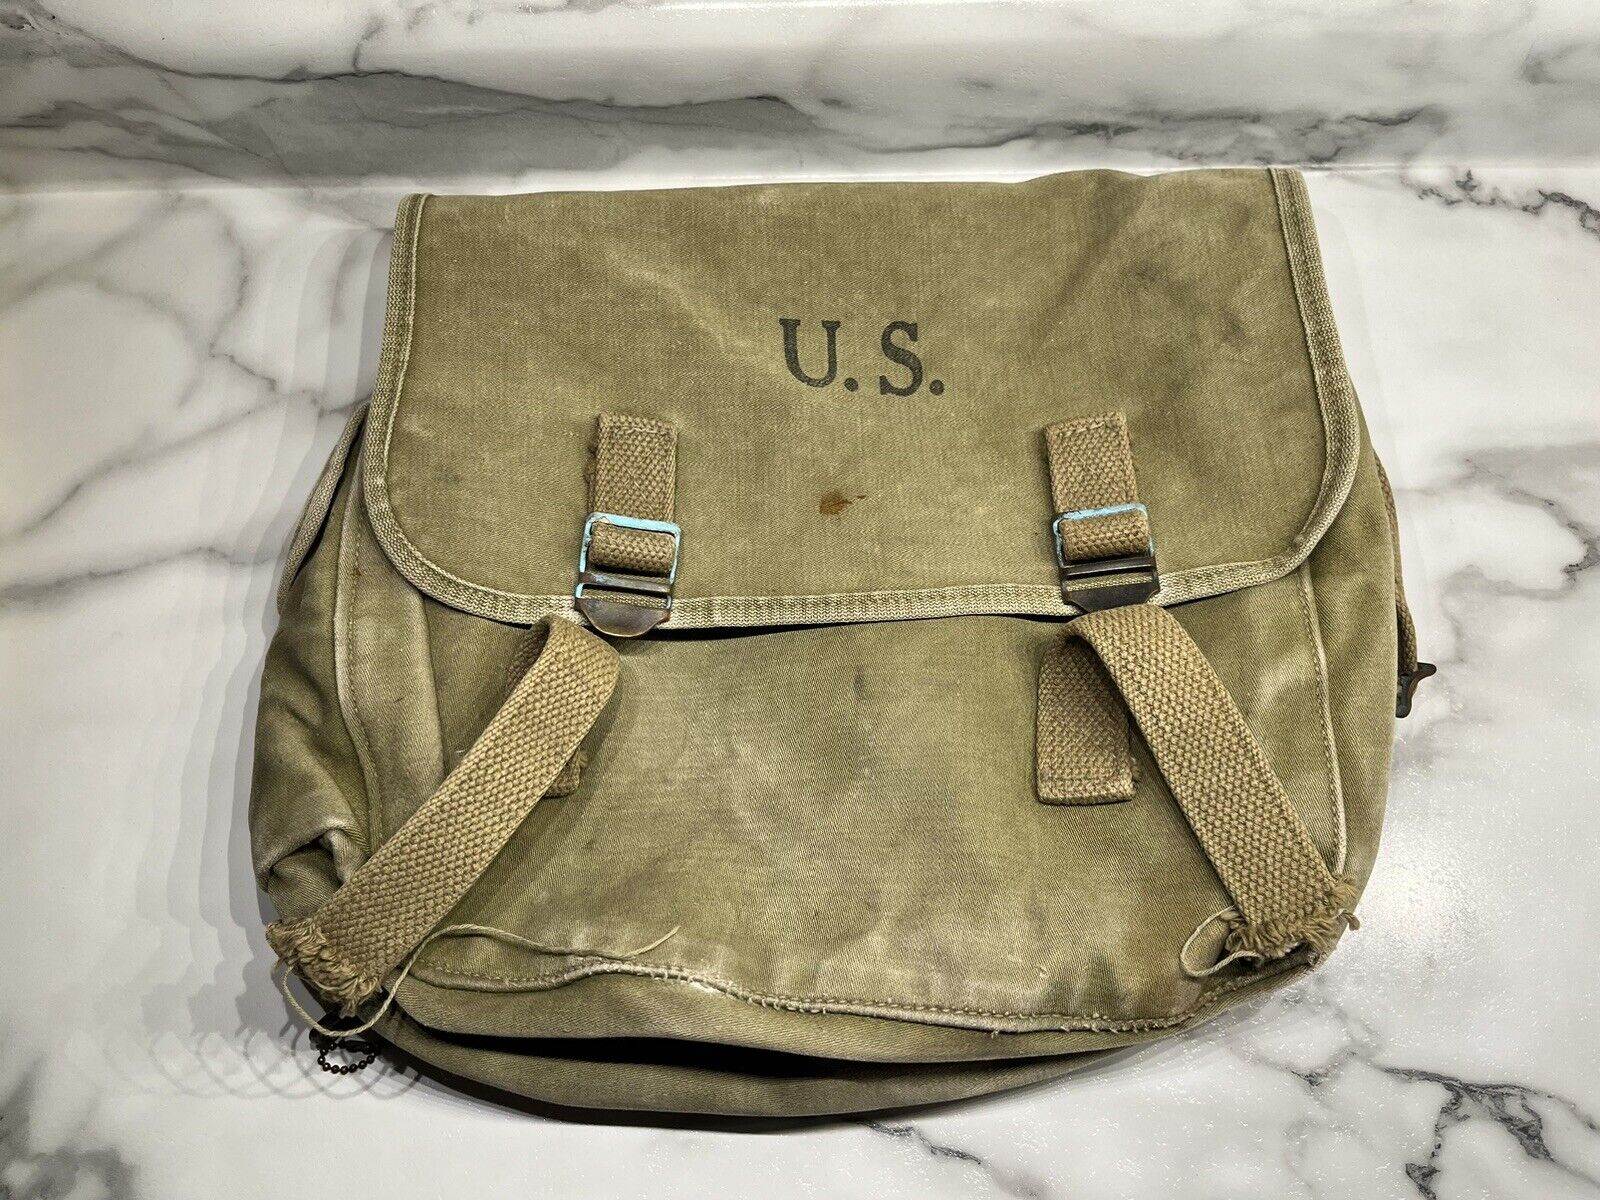 WW2 US Army M36 Musette Bag W/ Markings Langdon Tent & Awning Co 1942